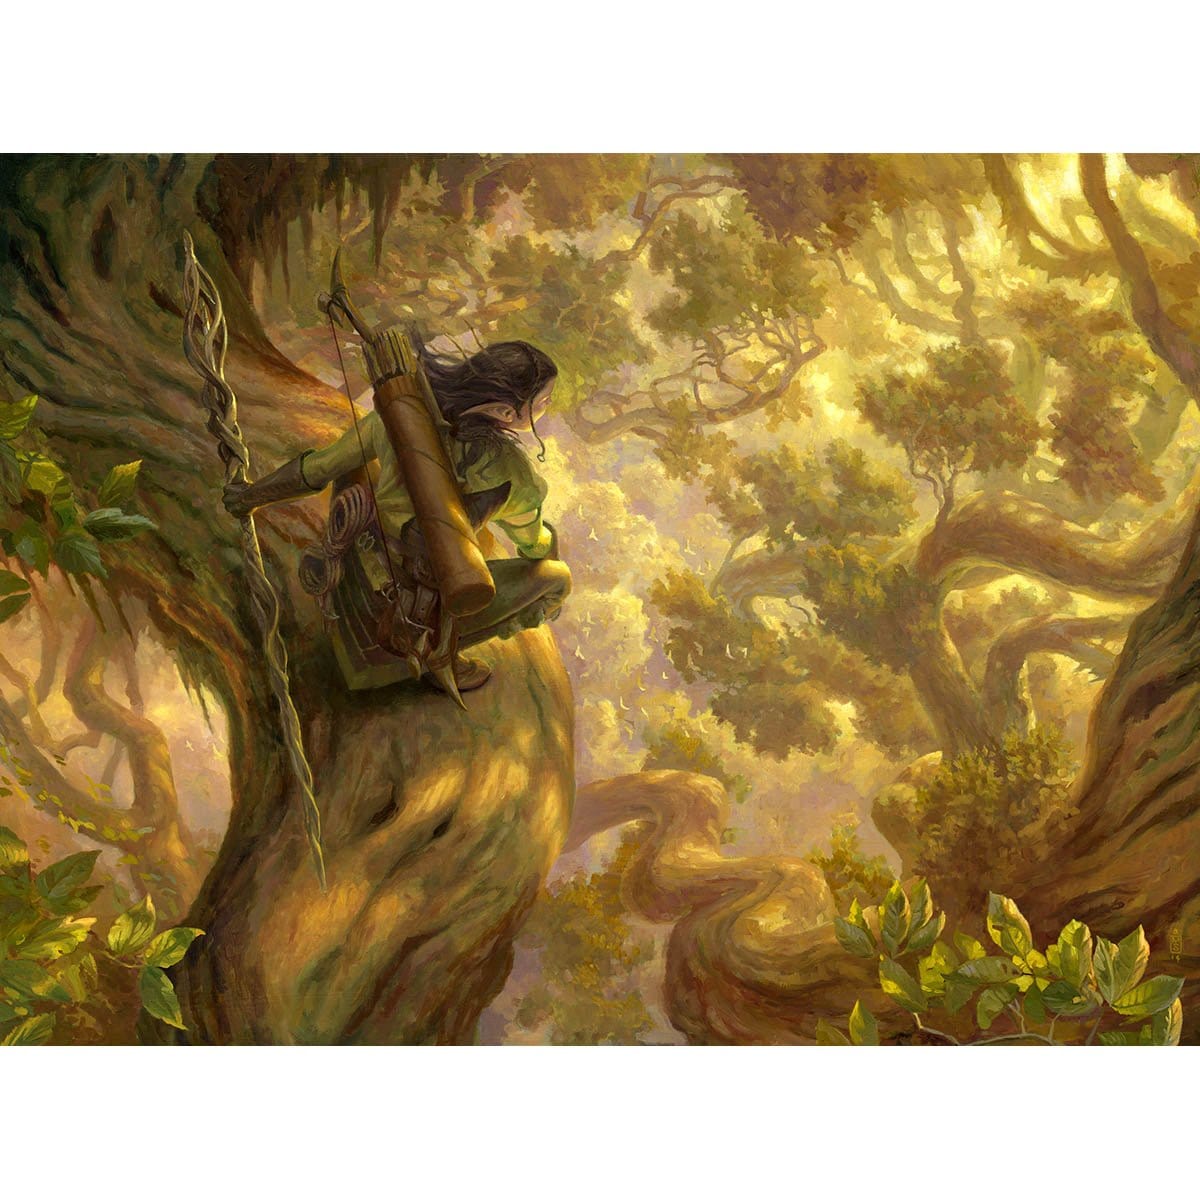 Nissa&#39;s Pilgrimage Print - Print - Original Magic Art - Accessories for Magic the Gathering and other card games